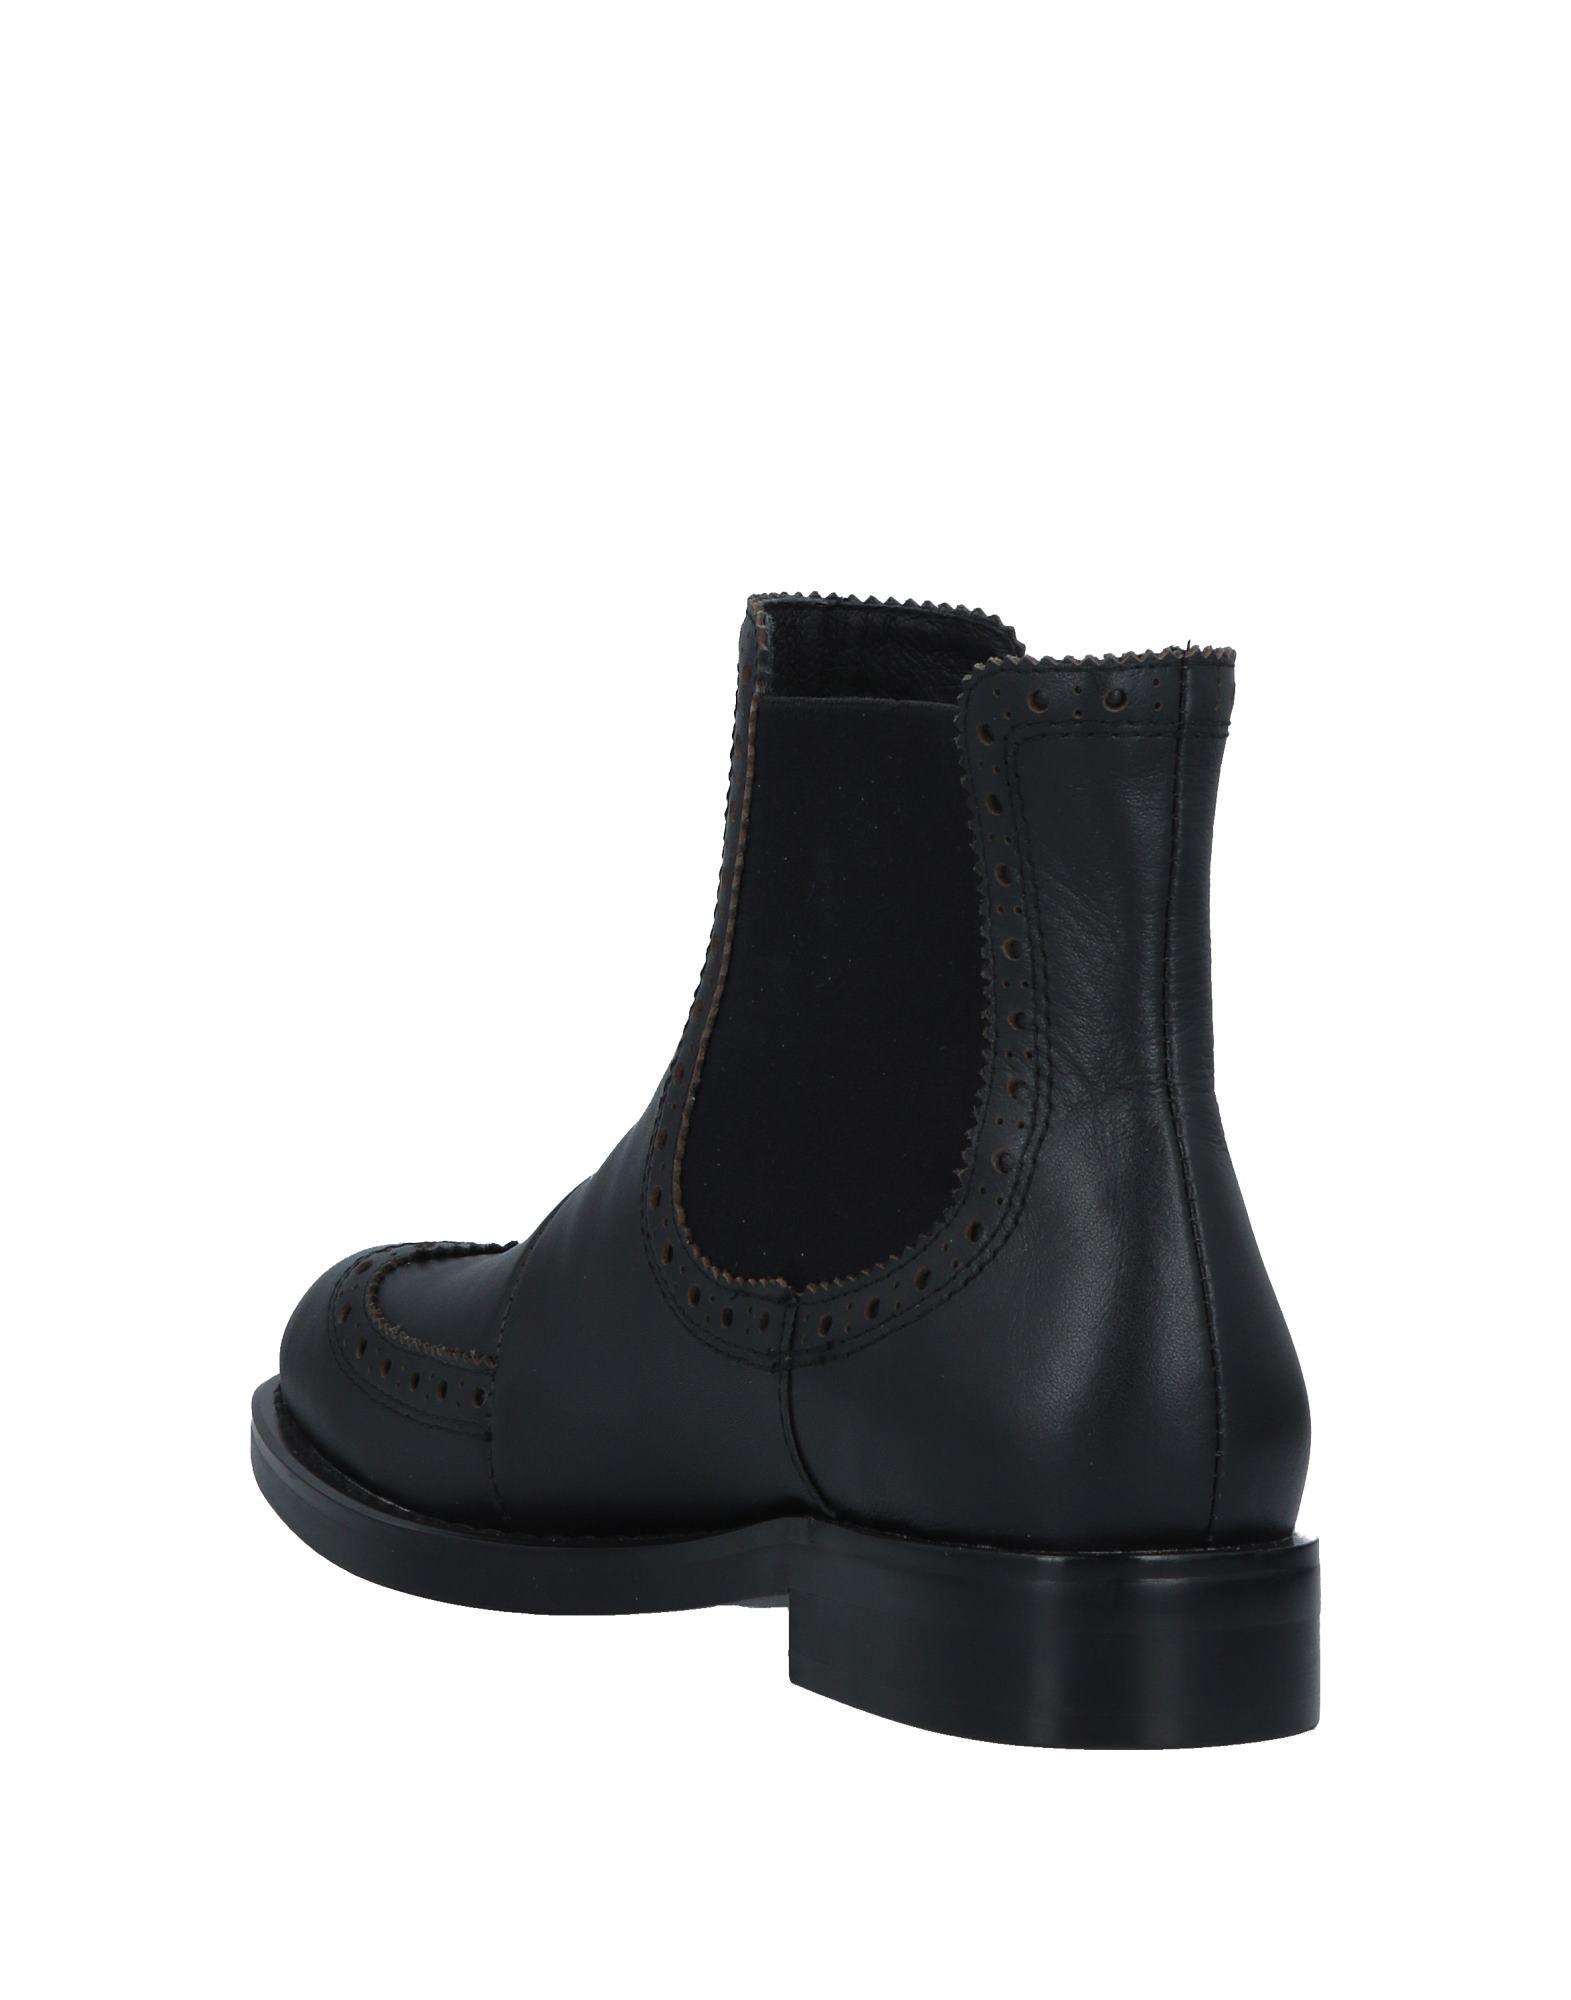 Bibi Lou Leather Ankle Boots in Black - Lyst